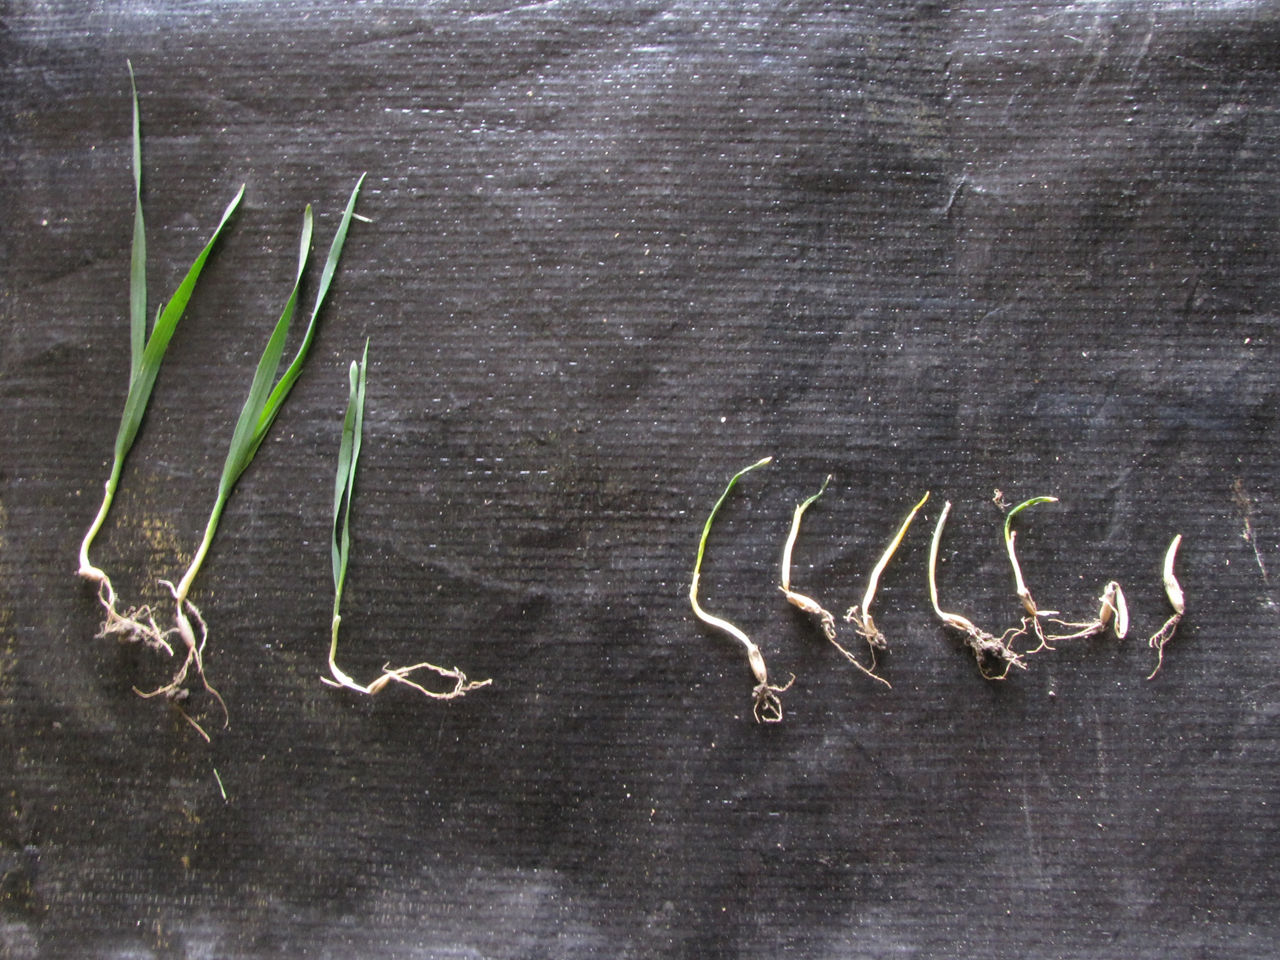 Untreated on left compared to triallate treated wild oats on right.